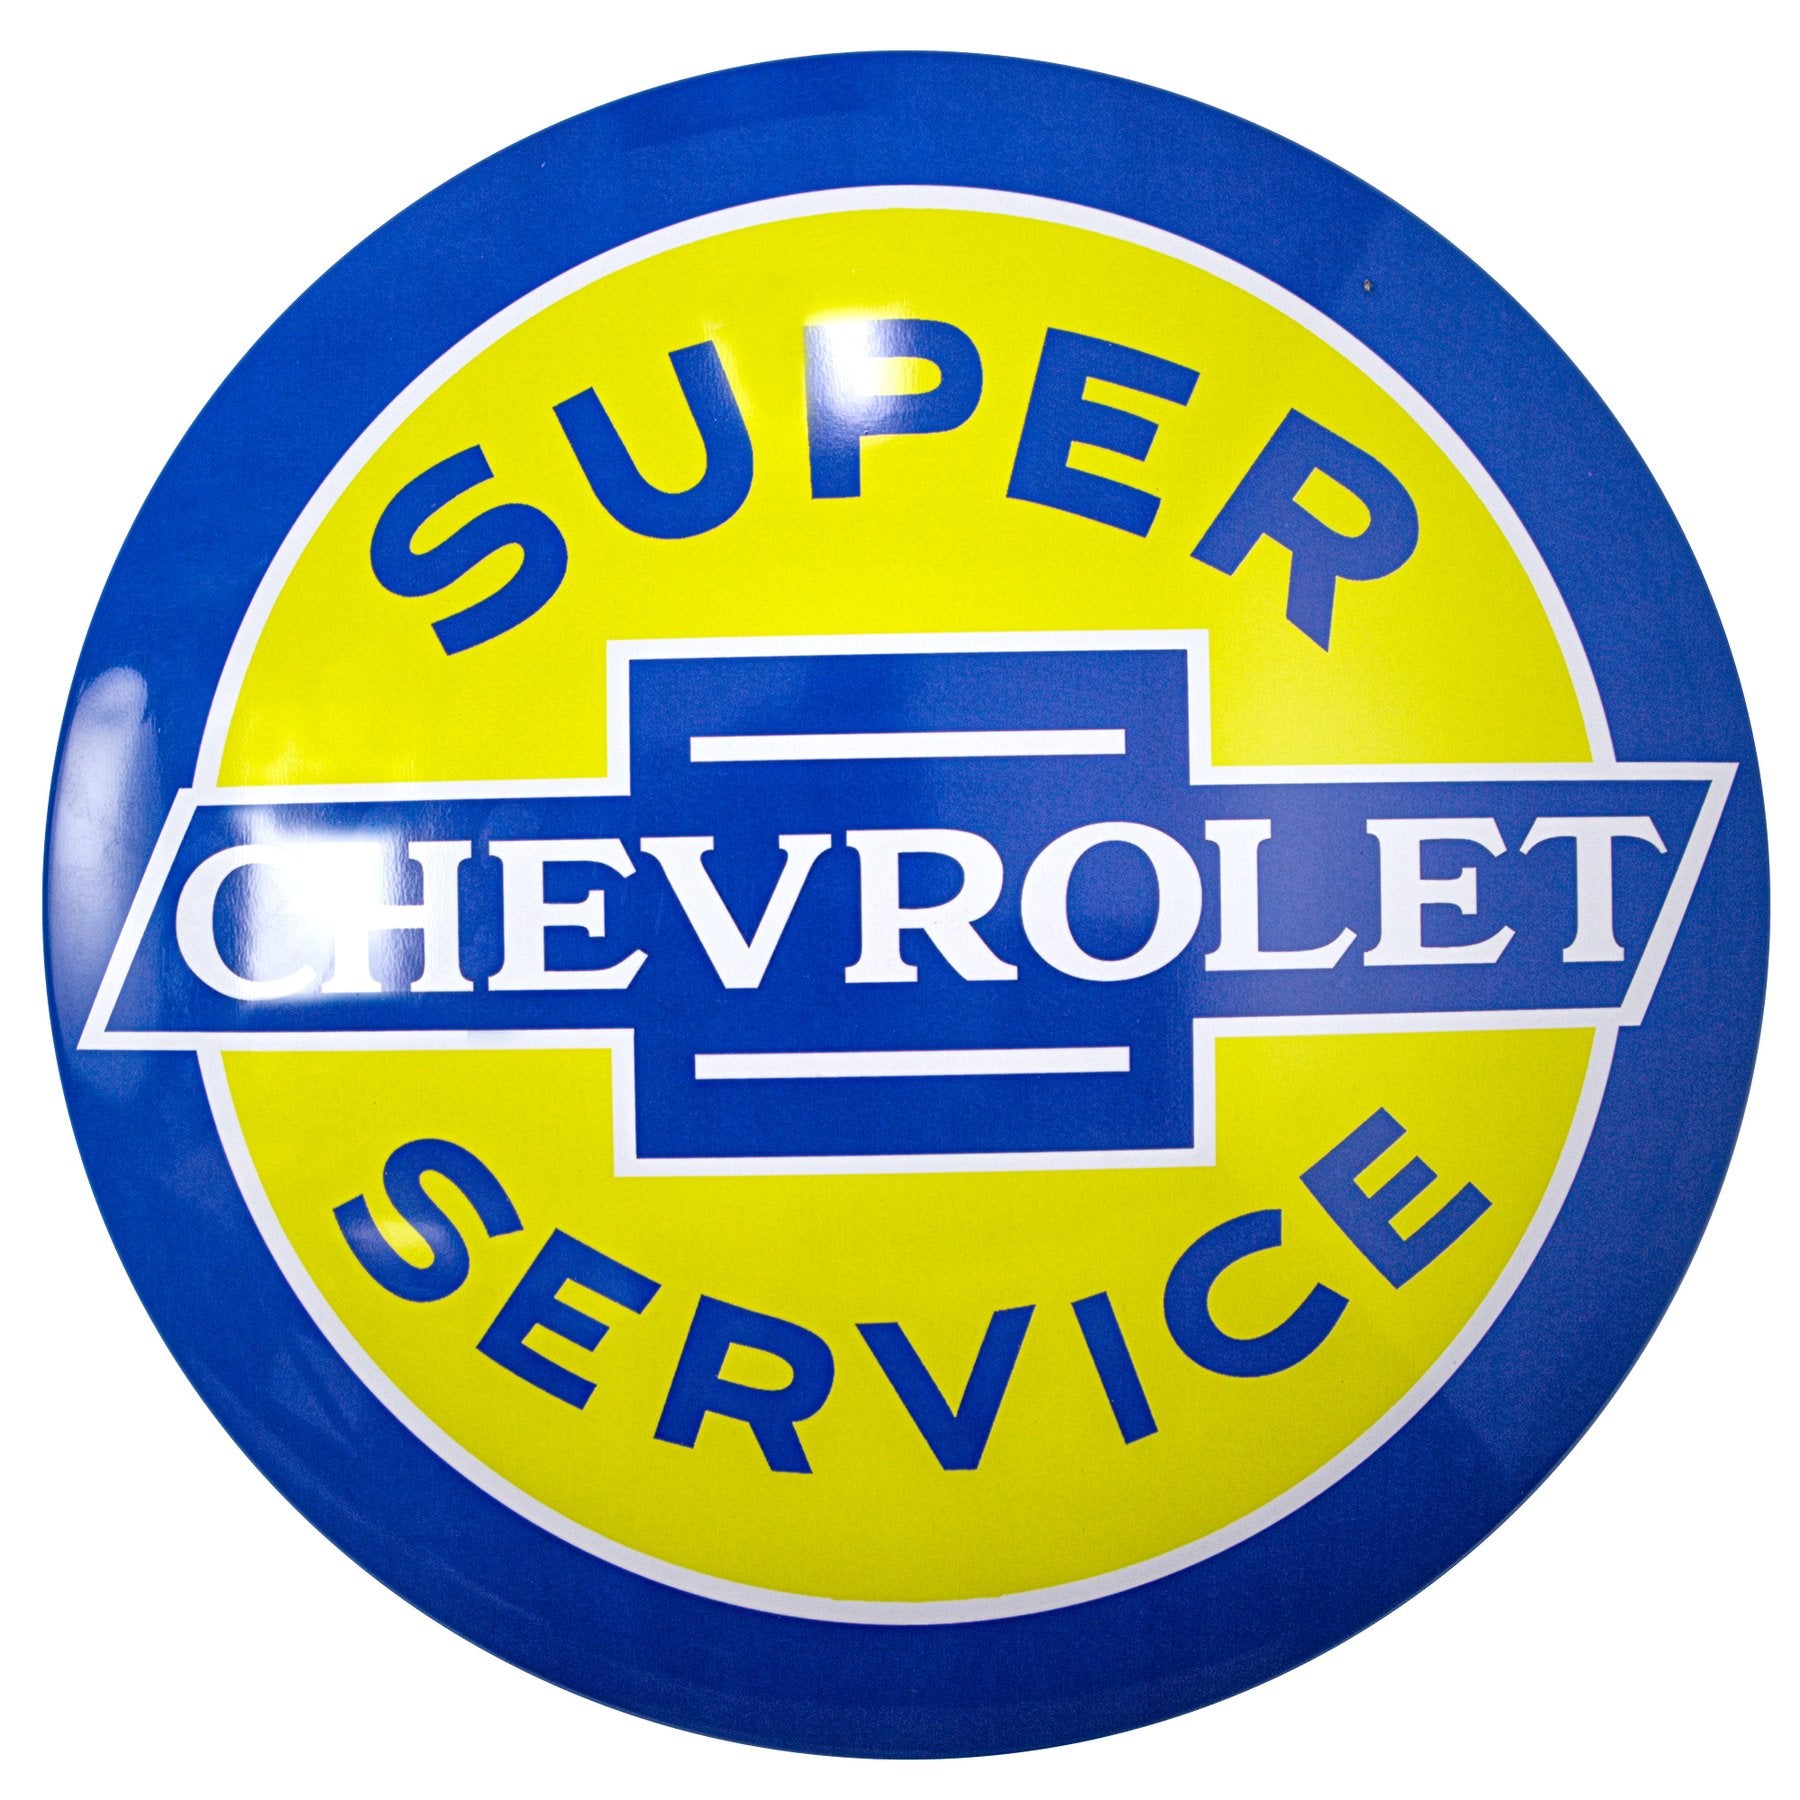 Chevrolet Super Service Dome Shaped Metal Sign